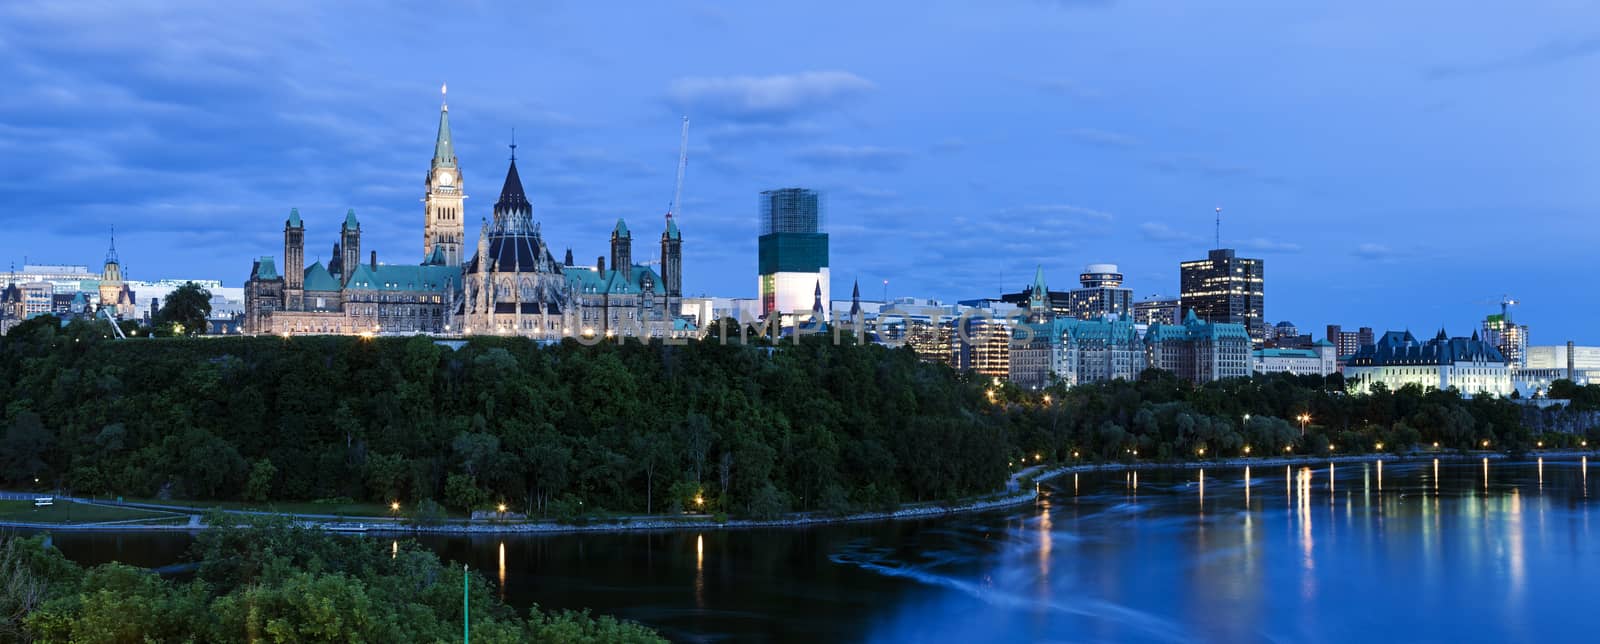 Peace Tower and Parliament Building in Ottawa by benkrut